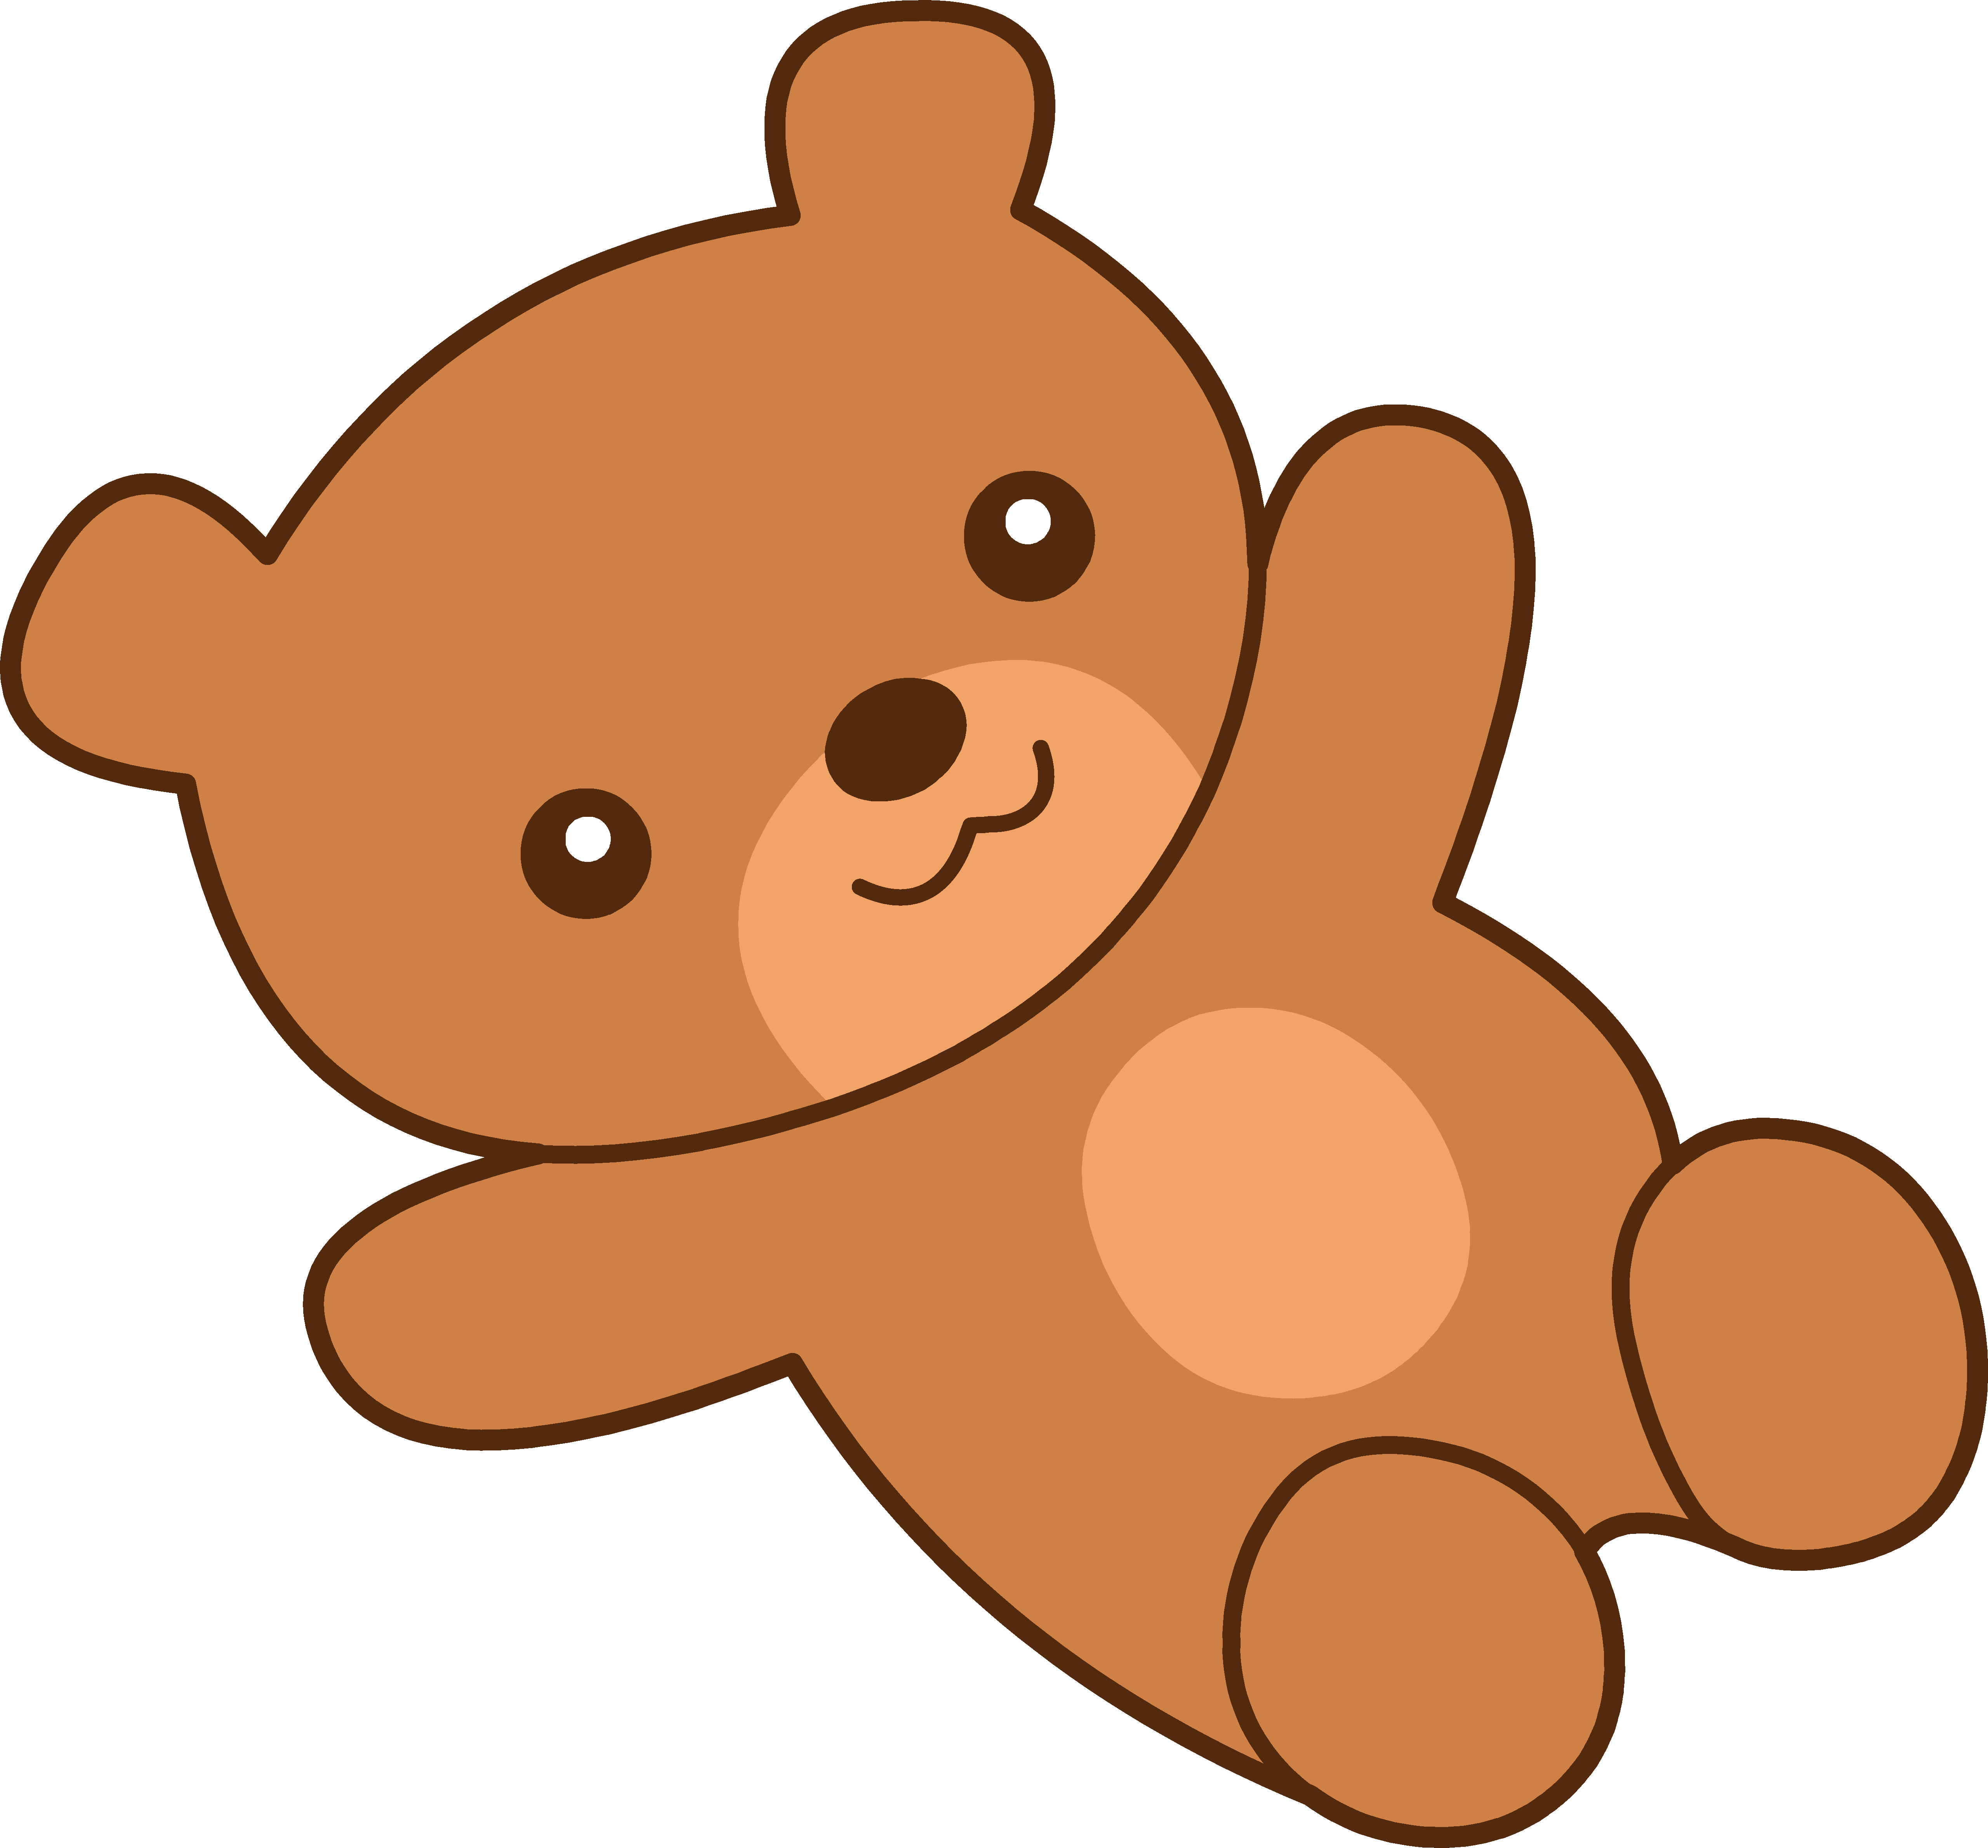 Teddy bear clipart free clipart images 3